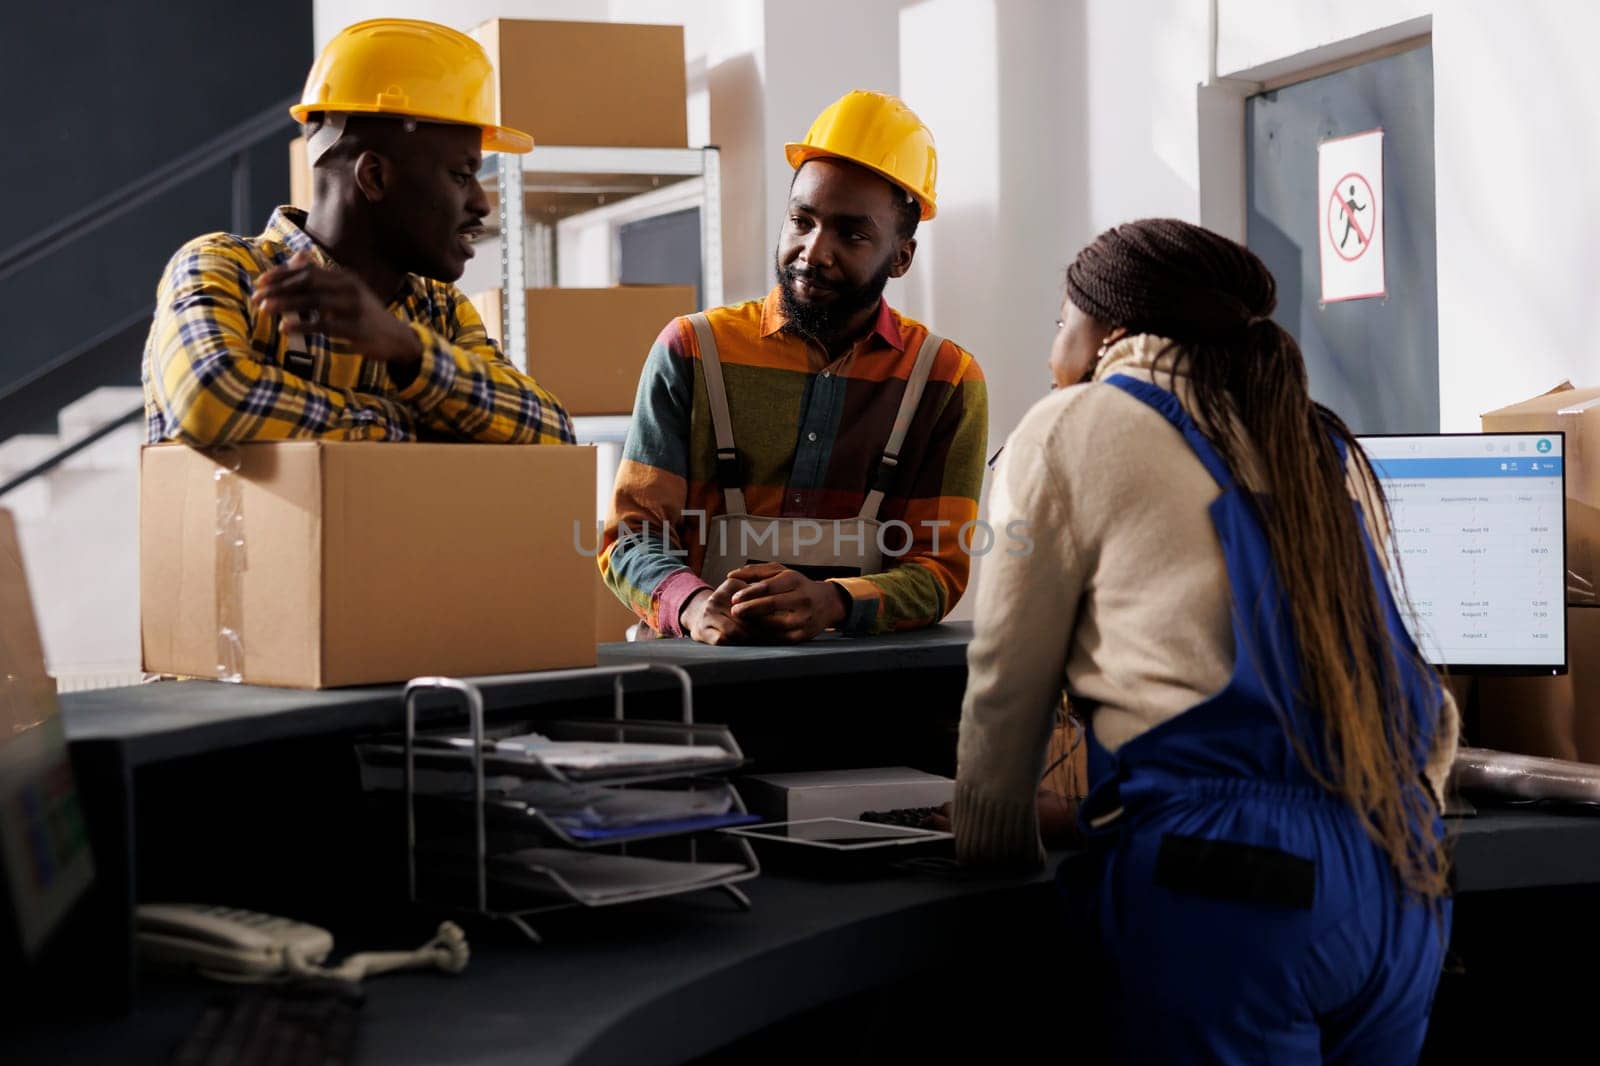 Warehouse workers holding parcel at reception, discussing package transportation. Freight distribution manager receiving cardboard box ready for shipment at checkout desk